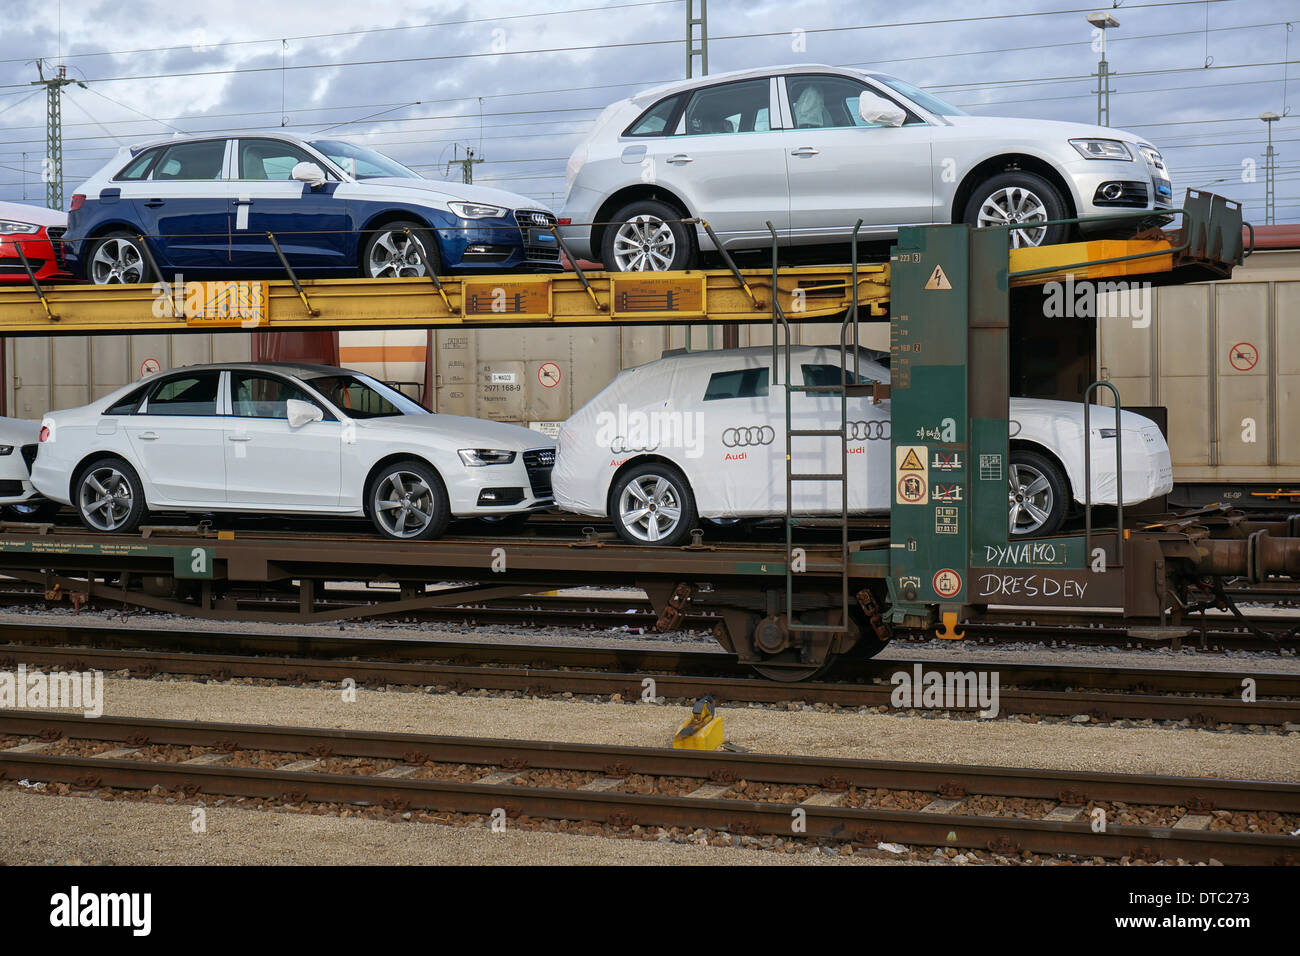 Germany: New Audi cars on freight trains in Ingolstadt (Audi headquarters) - 09 February 2014 Stock Photo